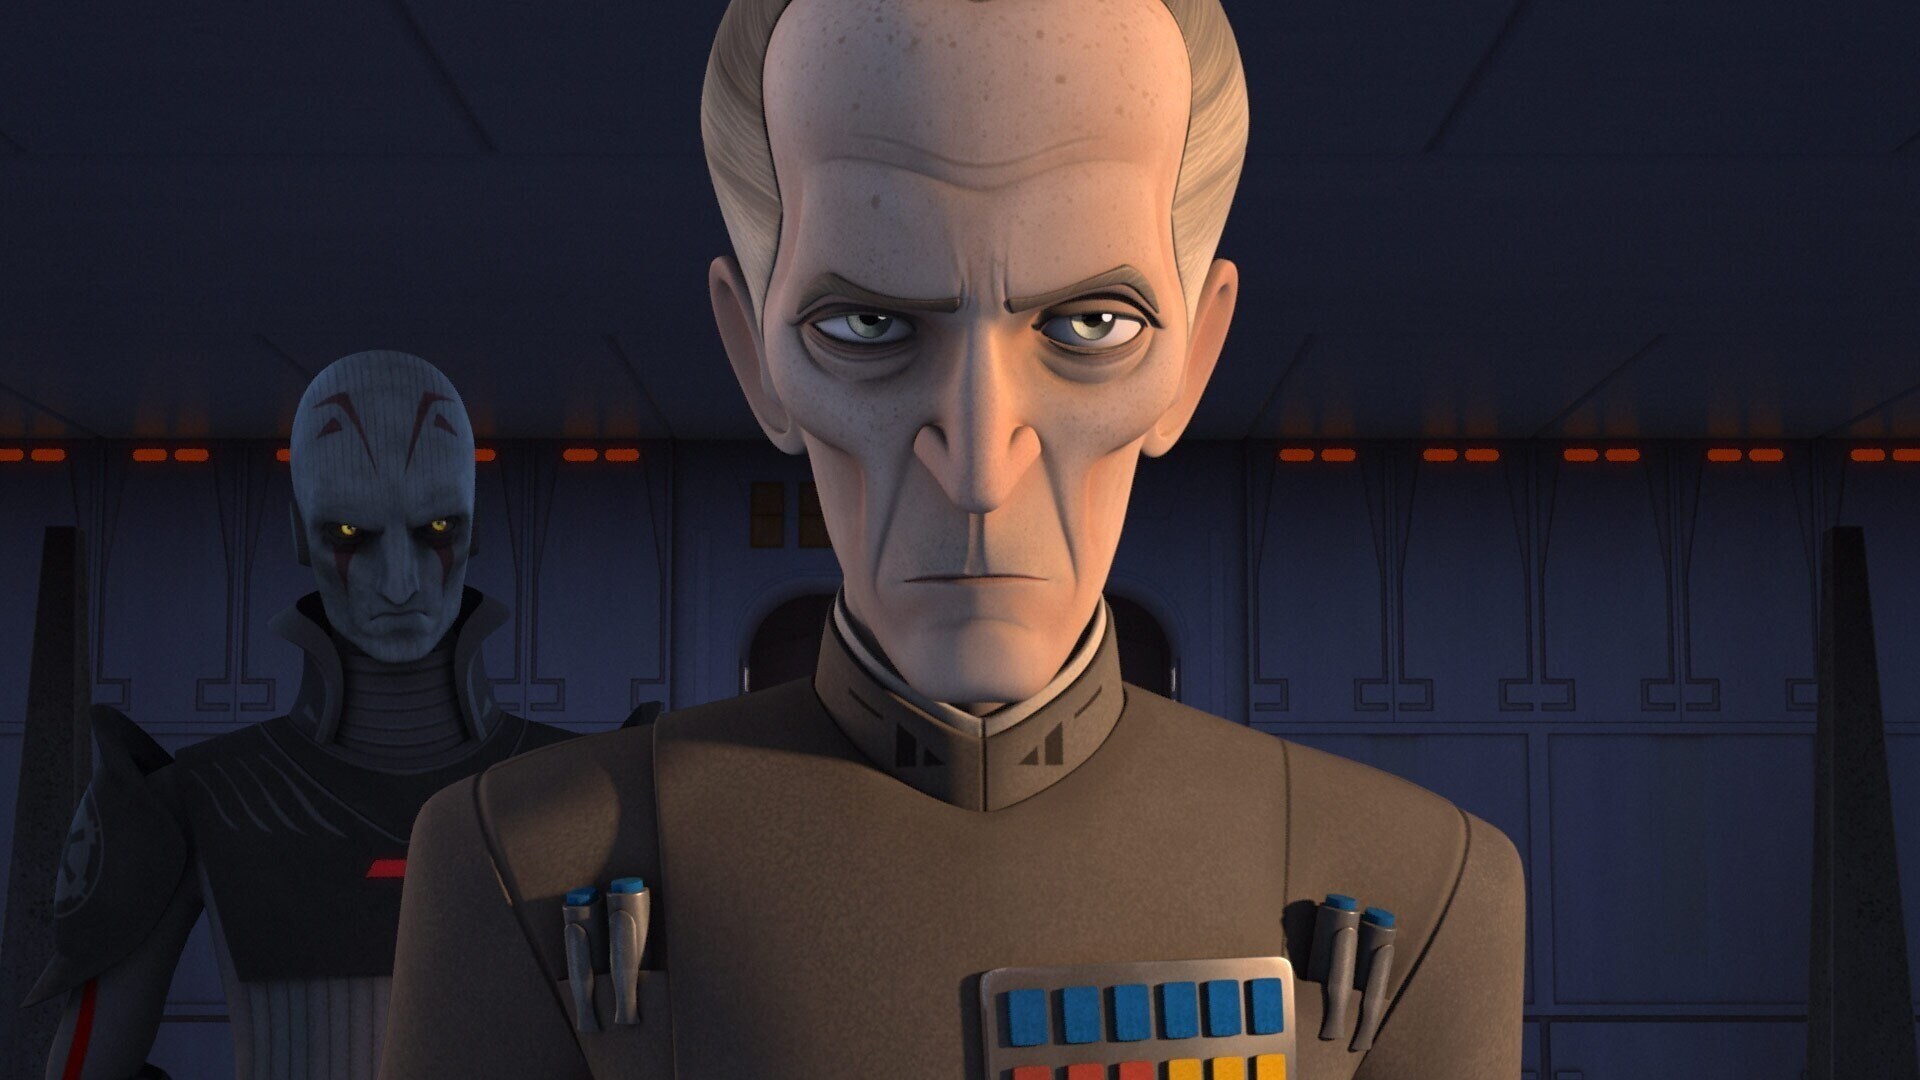 The Grand Inquisitor and Grand Moff Tarkin in Star Wars Rebels